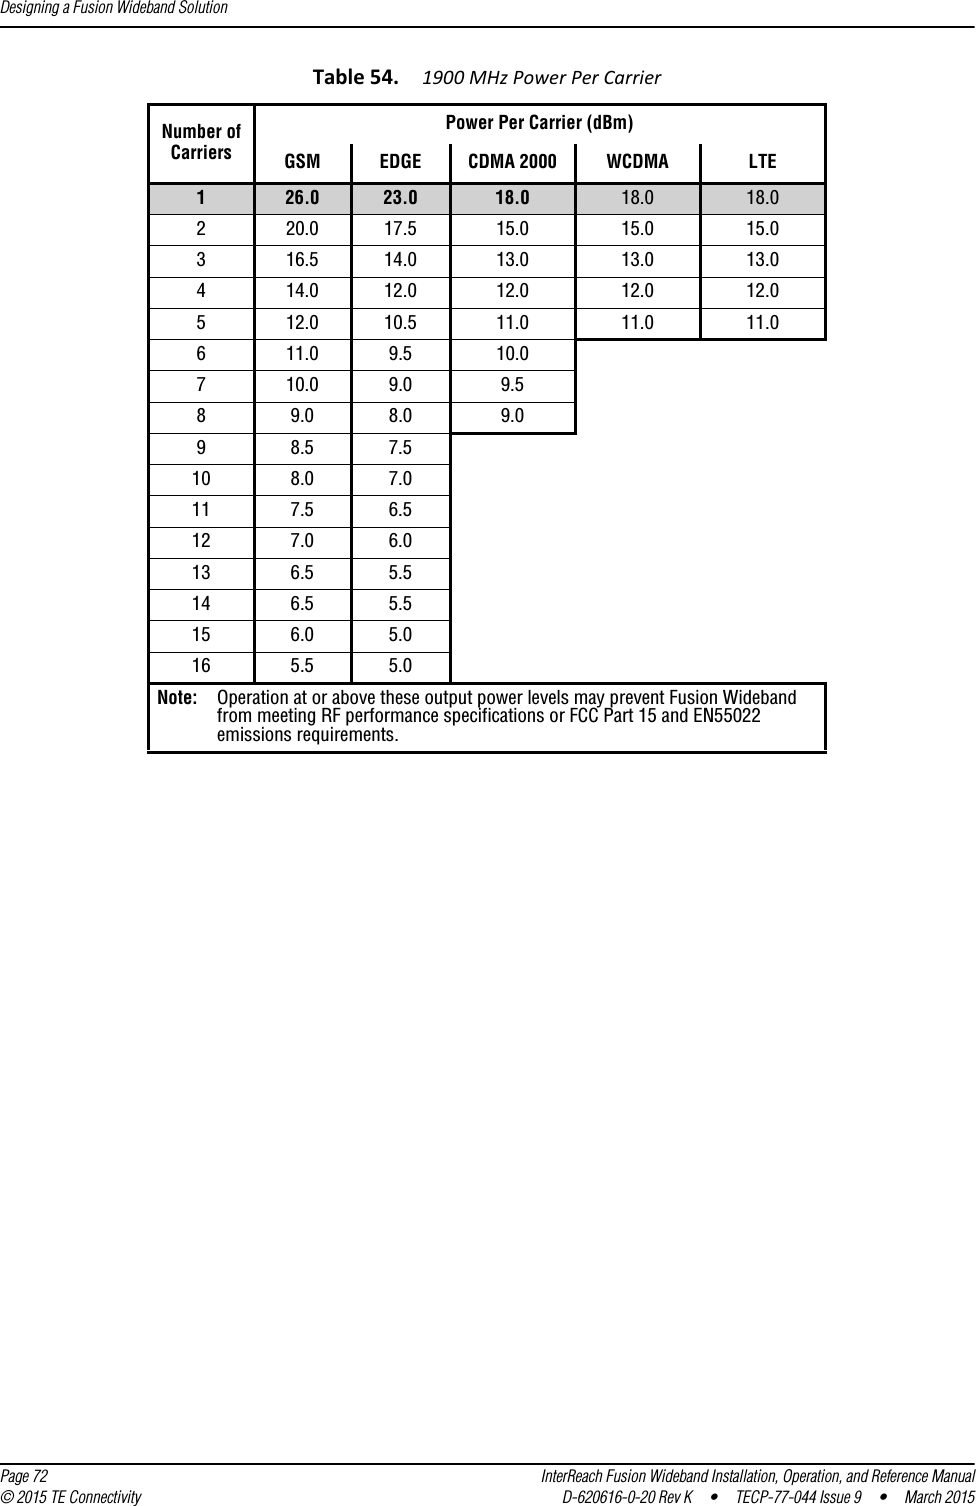 Designing a Fusion Wideband Solution  Page 72 InterReach Fusion Wideband Installation, Operation, and Reference Manual© 2015 TE Connectivity D-620616-0-20 Rev K  •  TECP-77-044 Issue 9  •  March 2015Table 54. 1900 MHz Power Per CarrierNumber ofCarriersPower Per Carrier (dBm)GSM EDGE CDMA 2000 WCDMA LTE126.0 23.0 18.0 18.0 18.0220.0 17.5 15.0 15.0 15.0316.5 14.0 13.0 13.0 13.0414.0 12.0 12.0 12.0 12.0512.0 10.5 11.0 11.0 11.0611.0 9.5 10.0710.0 9.0 9.589.0 8.0 9.098.5 7.510 8.0 7.011 7.5 6.512 7.0 6.013 6.5 5.514 6.5 5.515 6.0 5.016 5.5 5.0Note: Operation at or above these output power levels may prevent Fusion Wideband from meeting RF performance specifications or FCC Part 15 and EN55022 emissions requirements. 